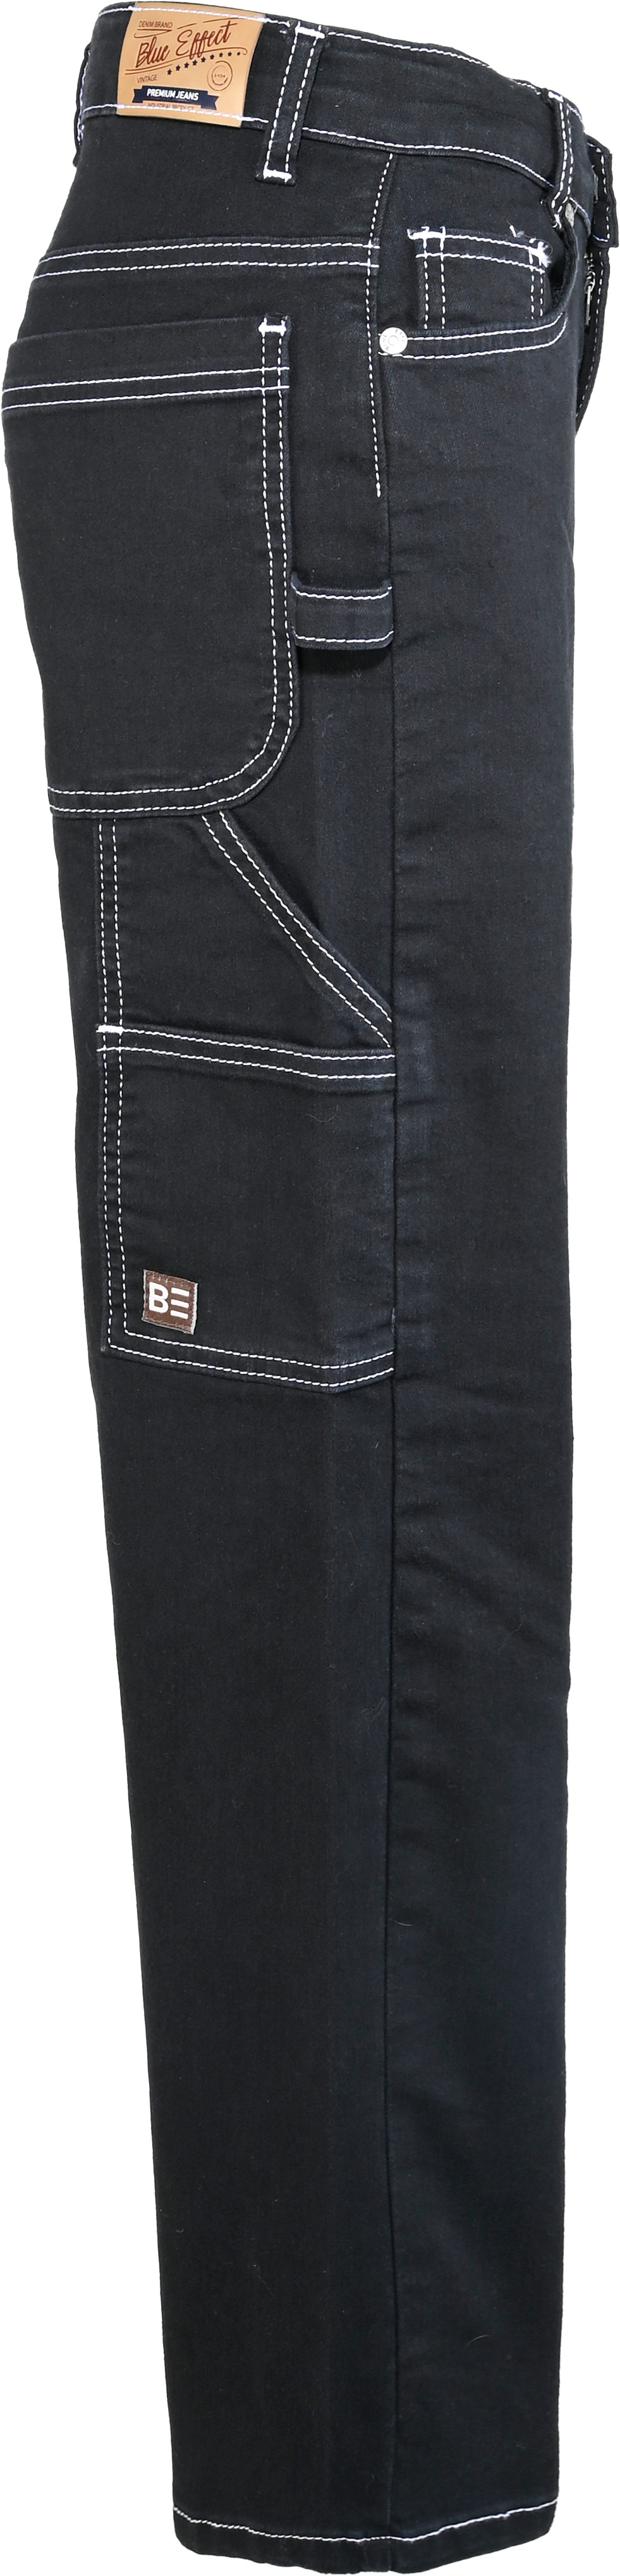 2867-Boys Baggy Jeans  ultrastretch, Workerstyle, available in normal, slim